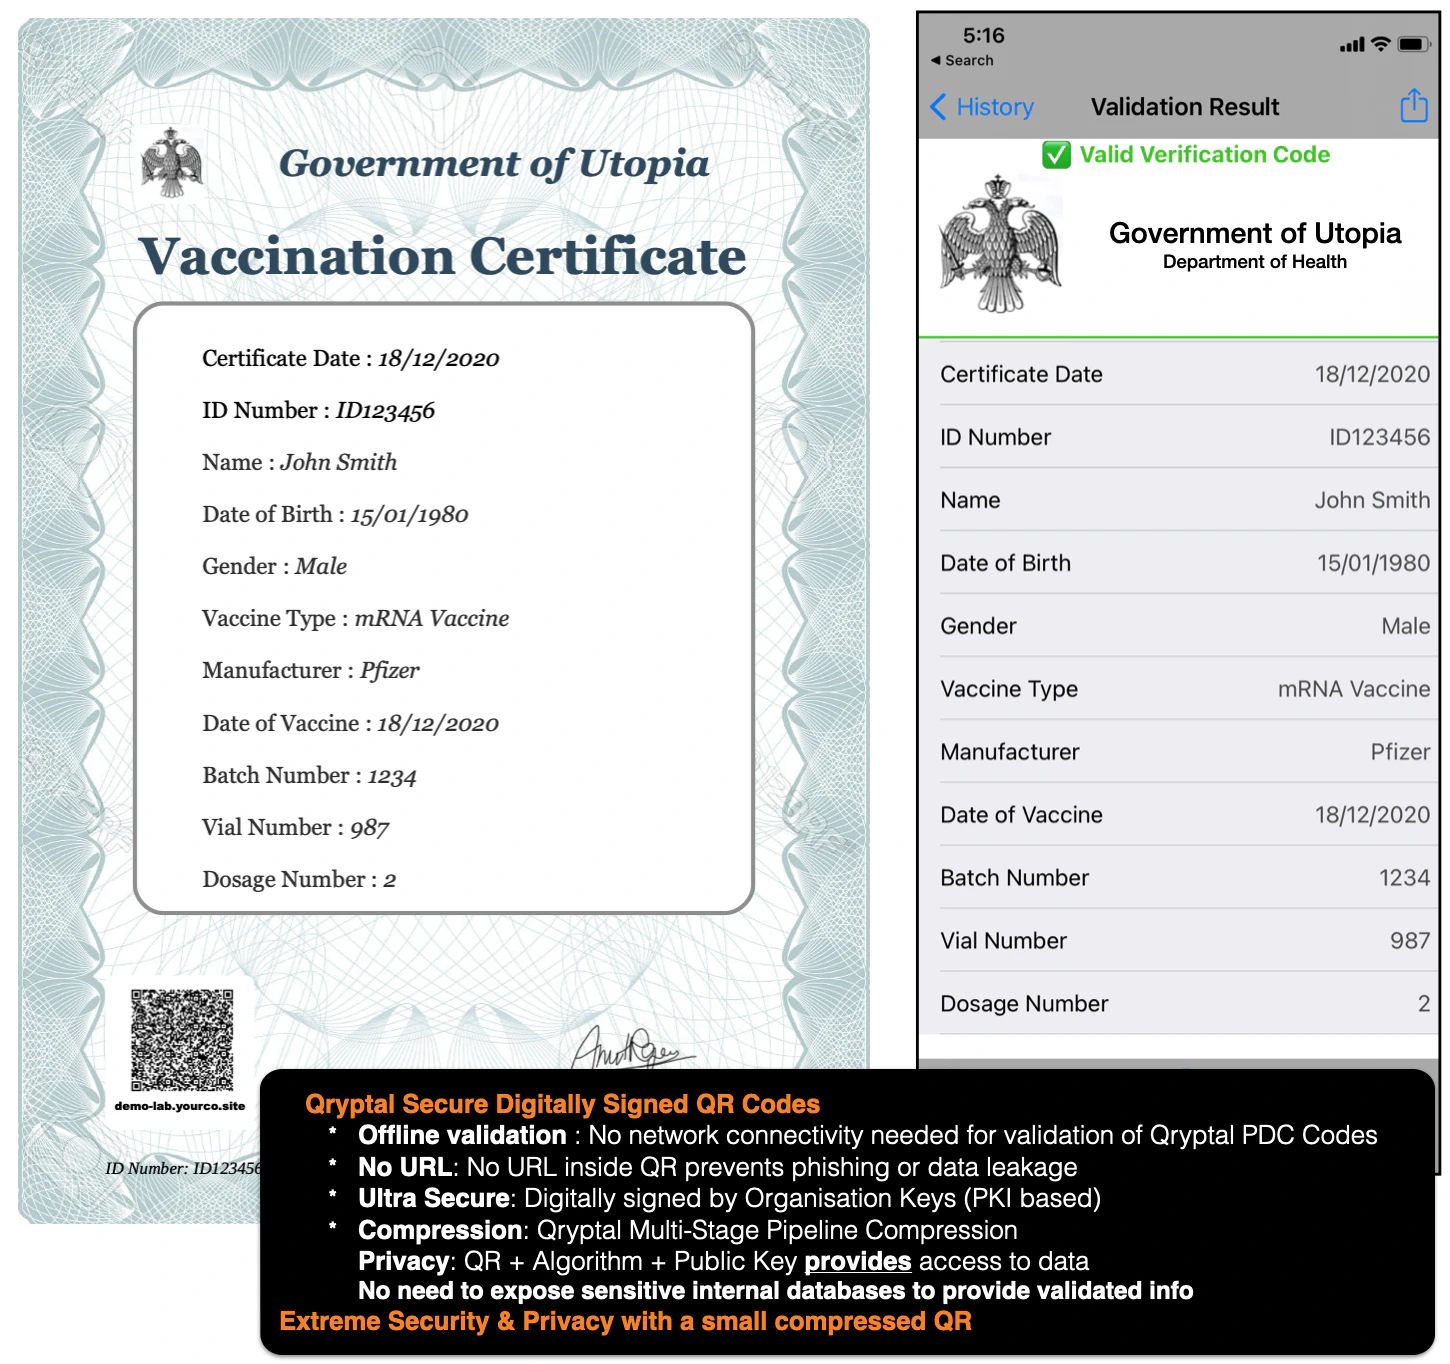 Sample Covid Vaccination Certificate with secure QR code